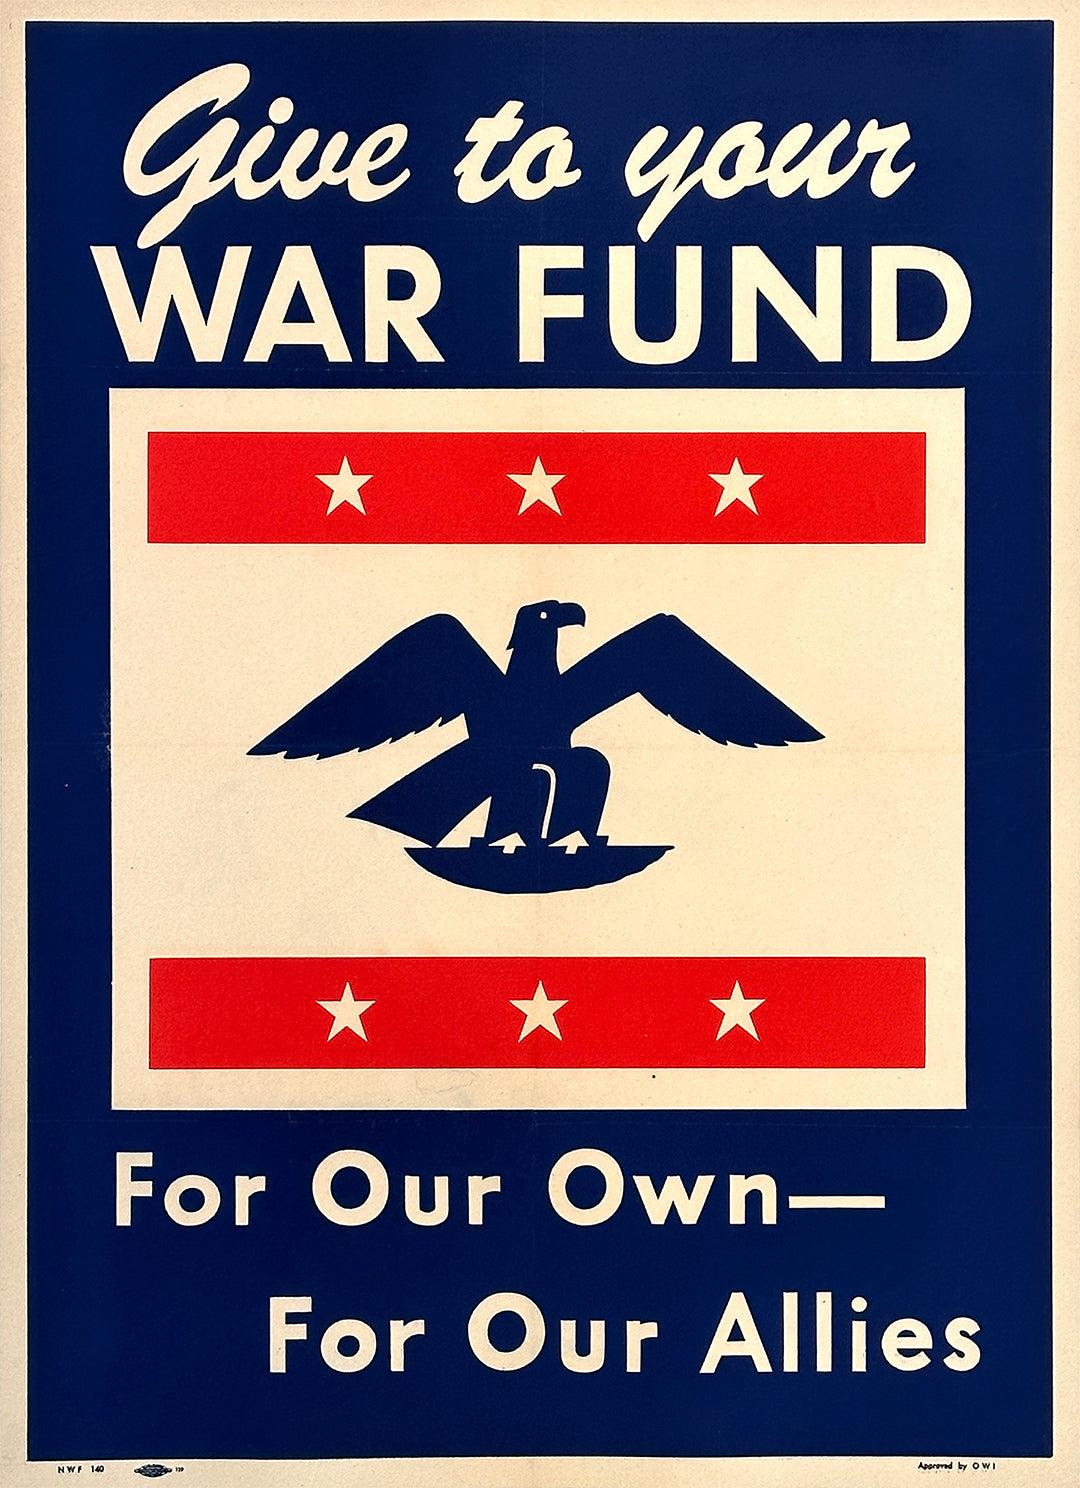 Original Vintage WWII Give to Your War Fund Poster c1943